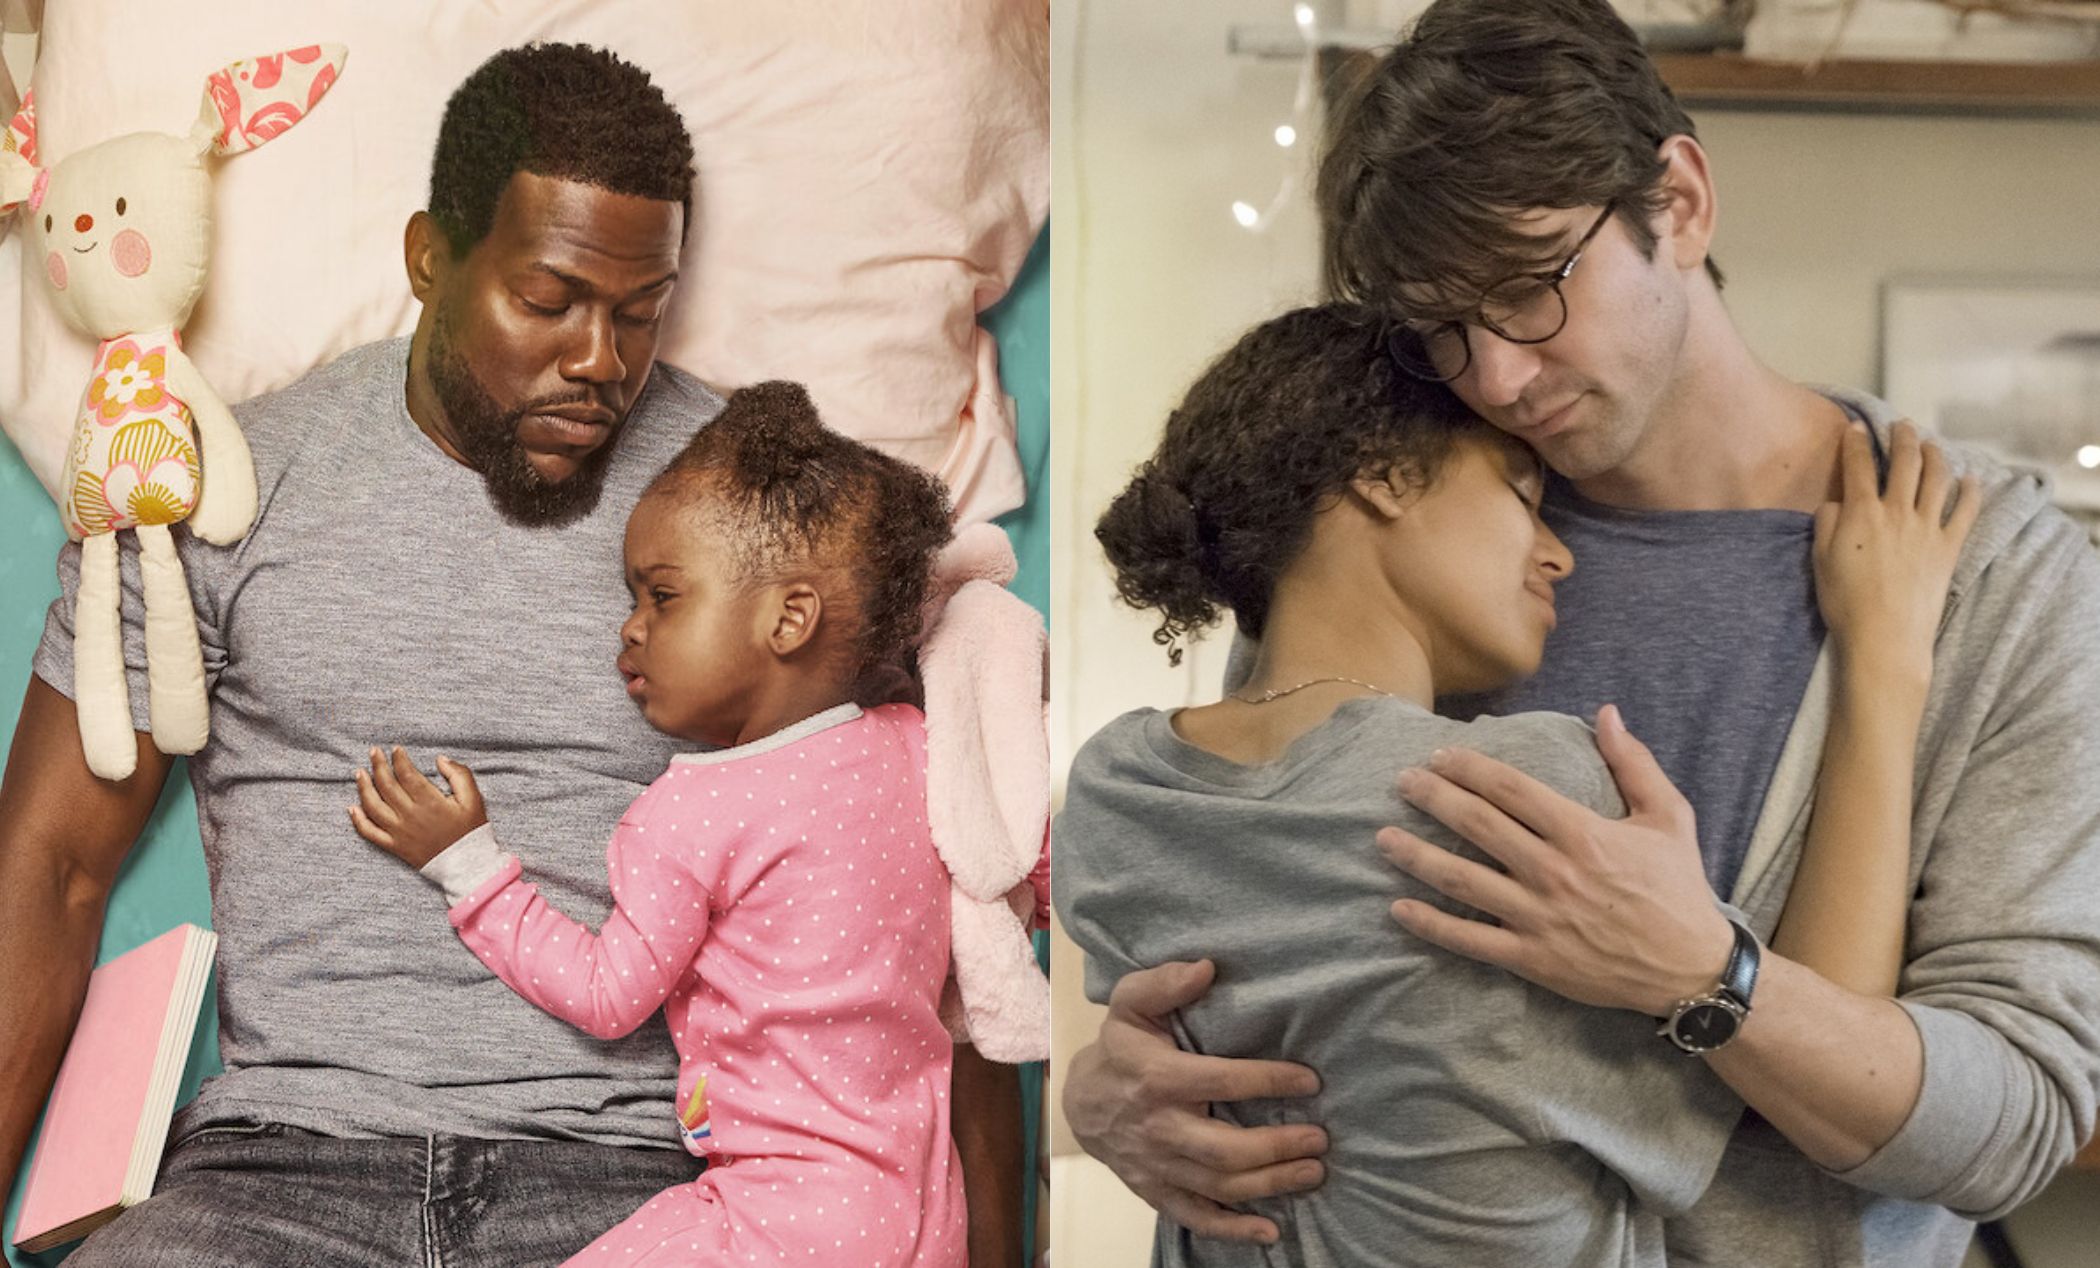 Fatherhood, Irreplaceable You, and more: Netflix original movies that left fans in tears [Video]